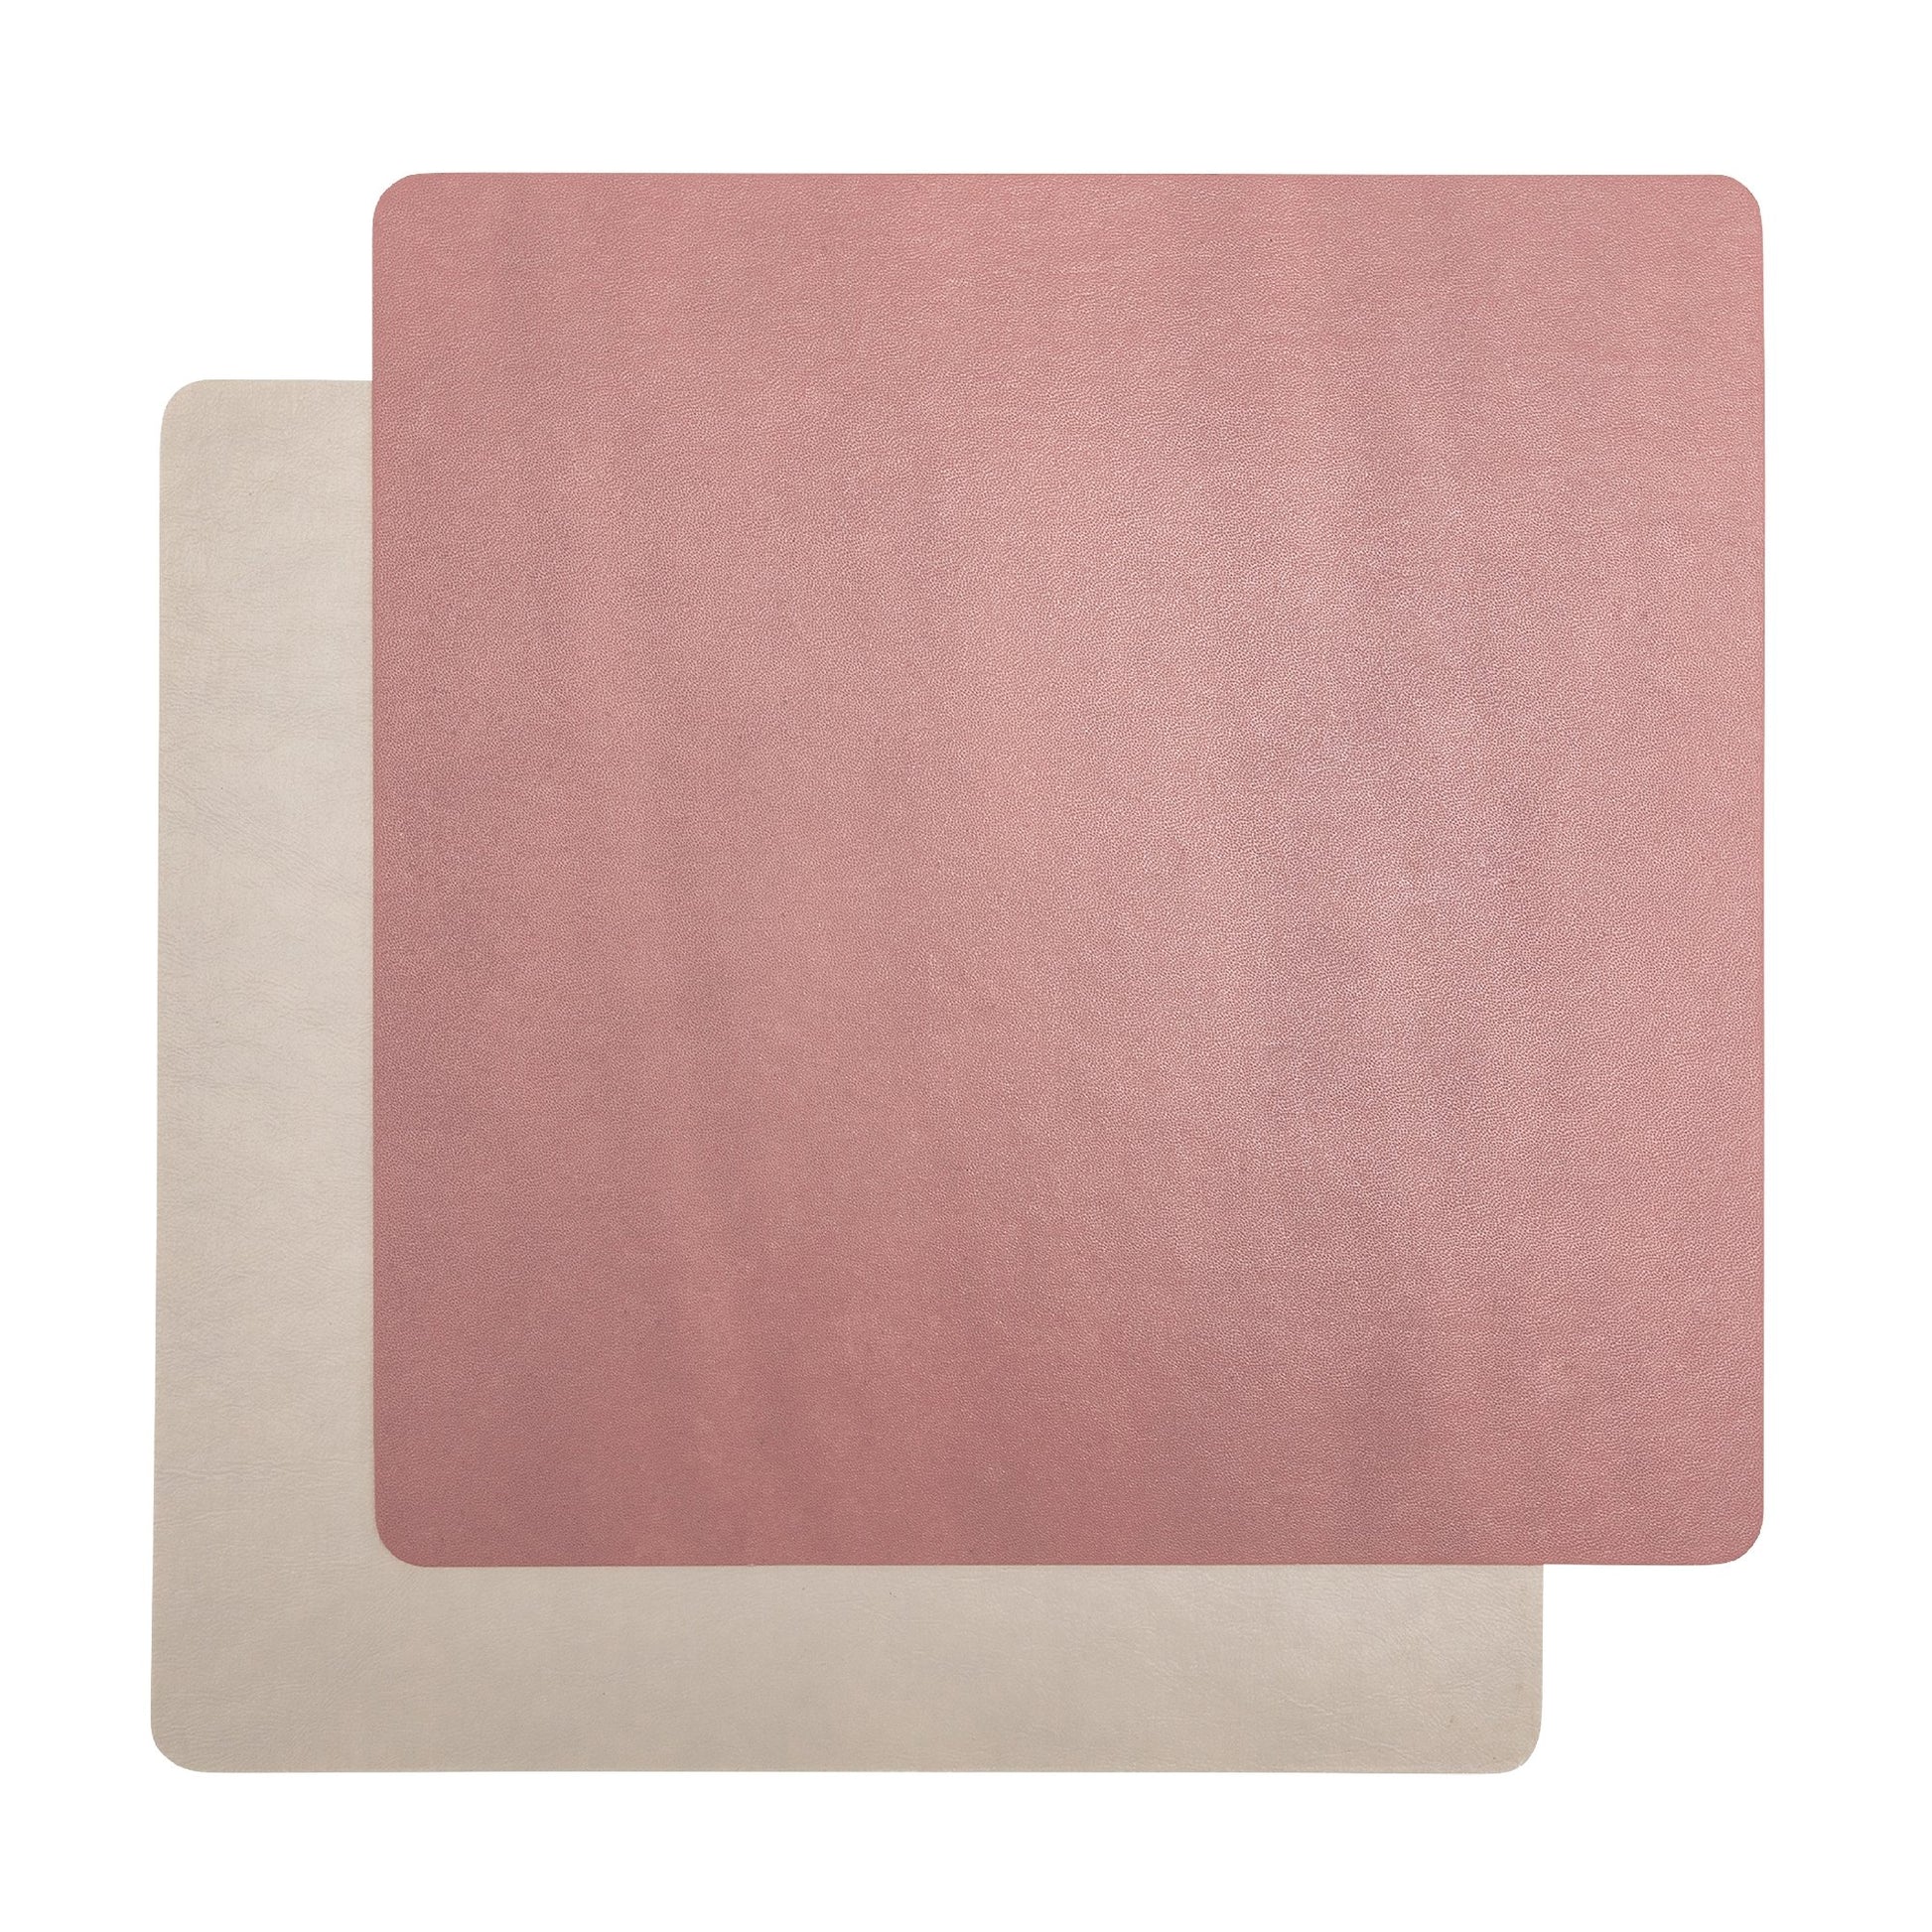 Two square washable paper placemats are shown one on top of the other. The one in the foreground is pink and the one at the rear is beige.